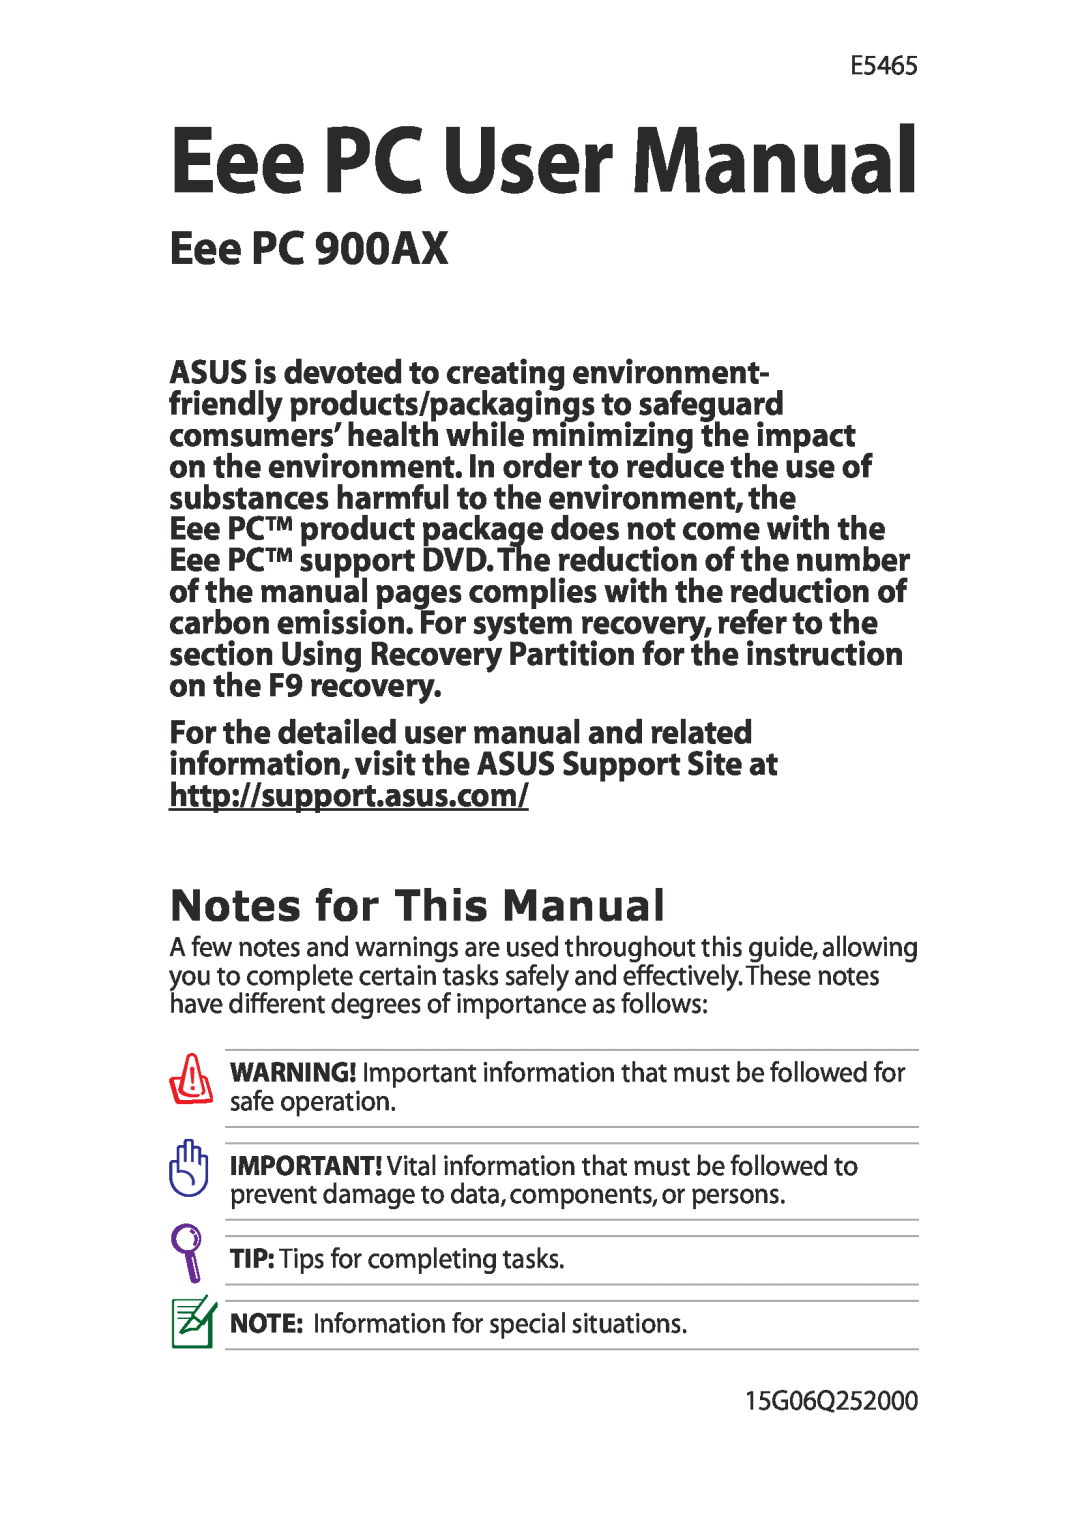 Asus user manual Notes for This Manual, Eee PC User Manual, Eee PC 900AX 